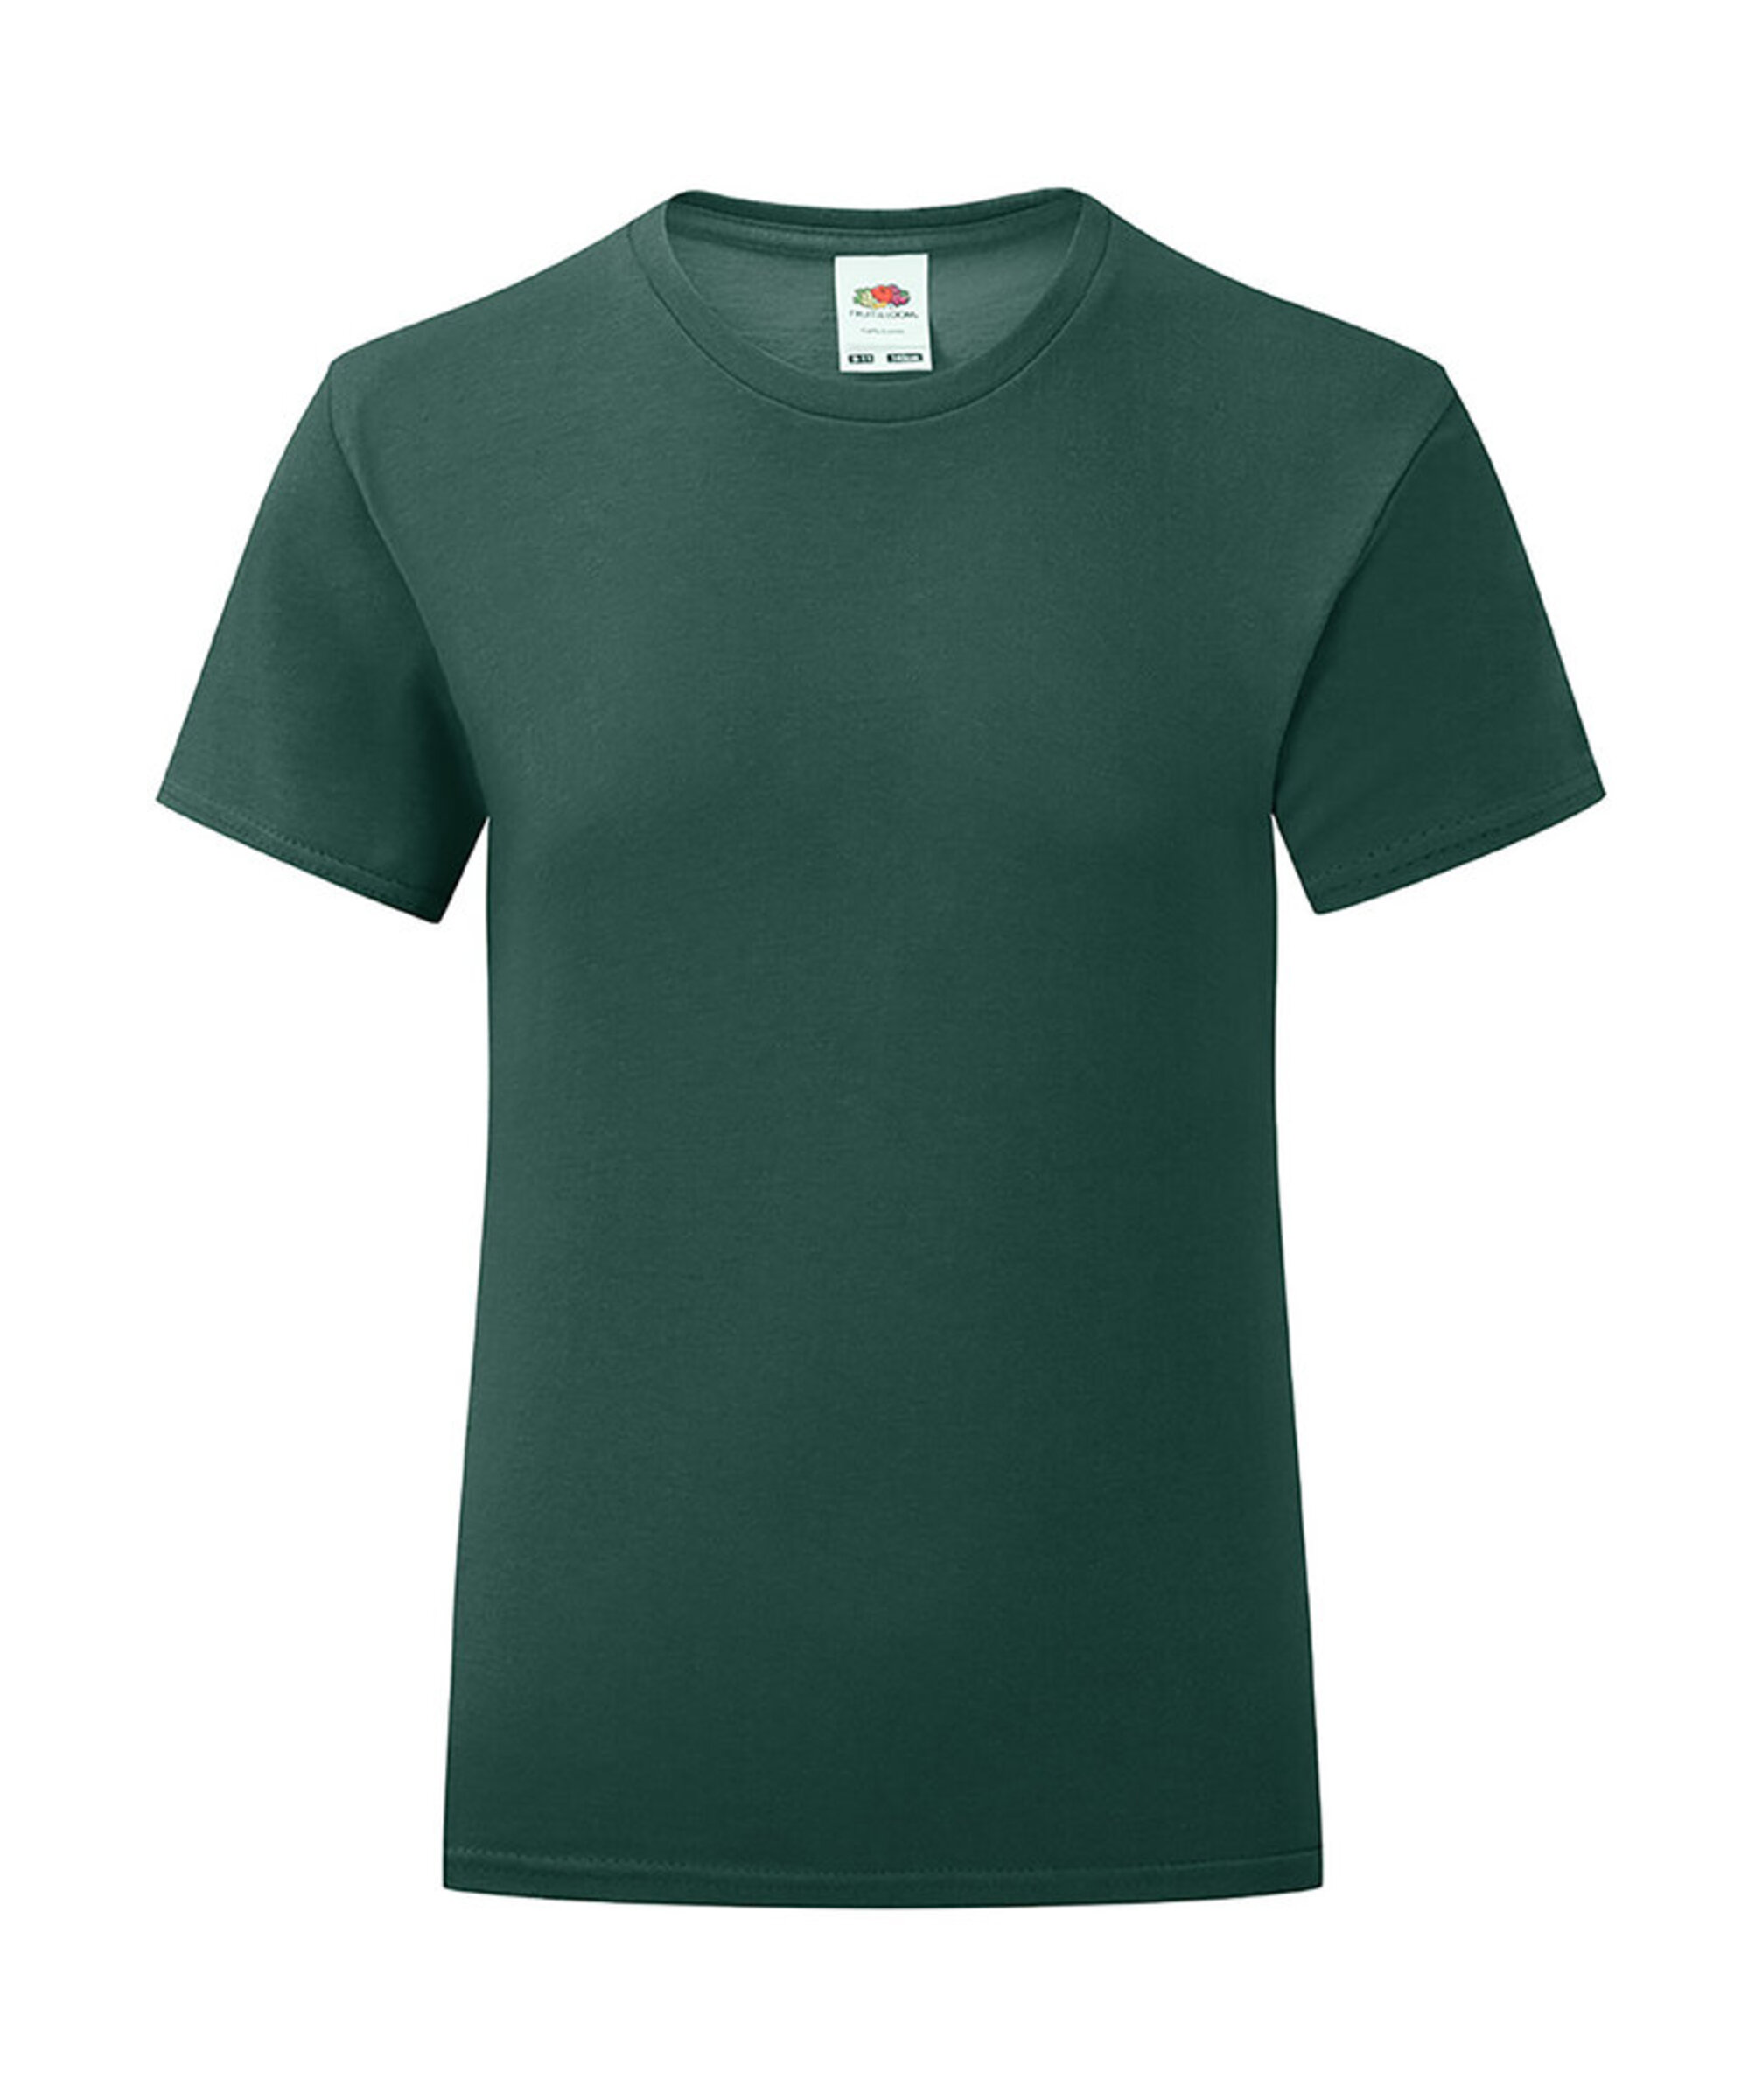 Fruit Of The Loom Girls Iconic T - Forest Green - 3-4yrs